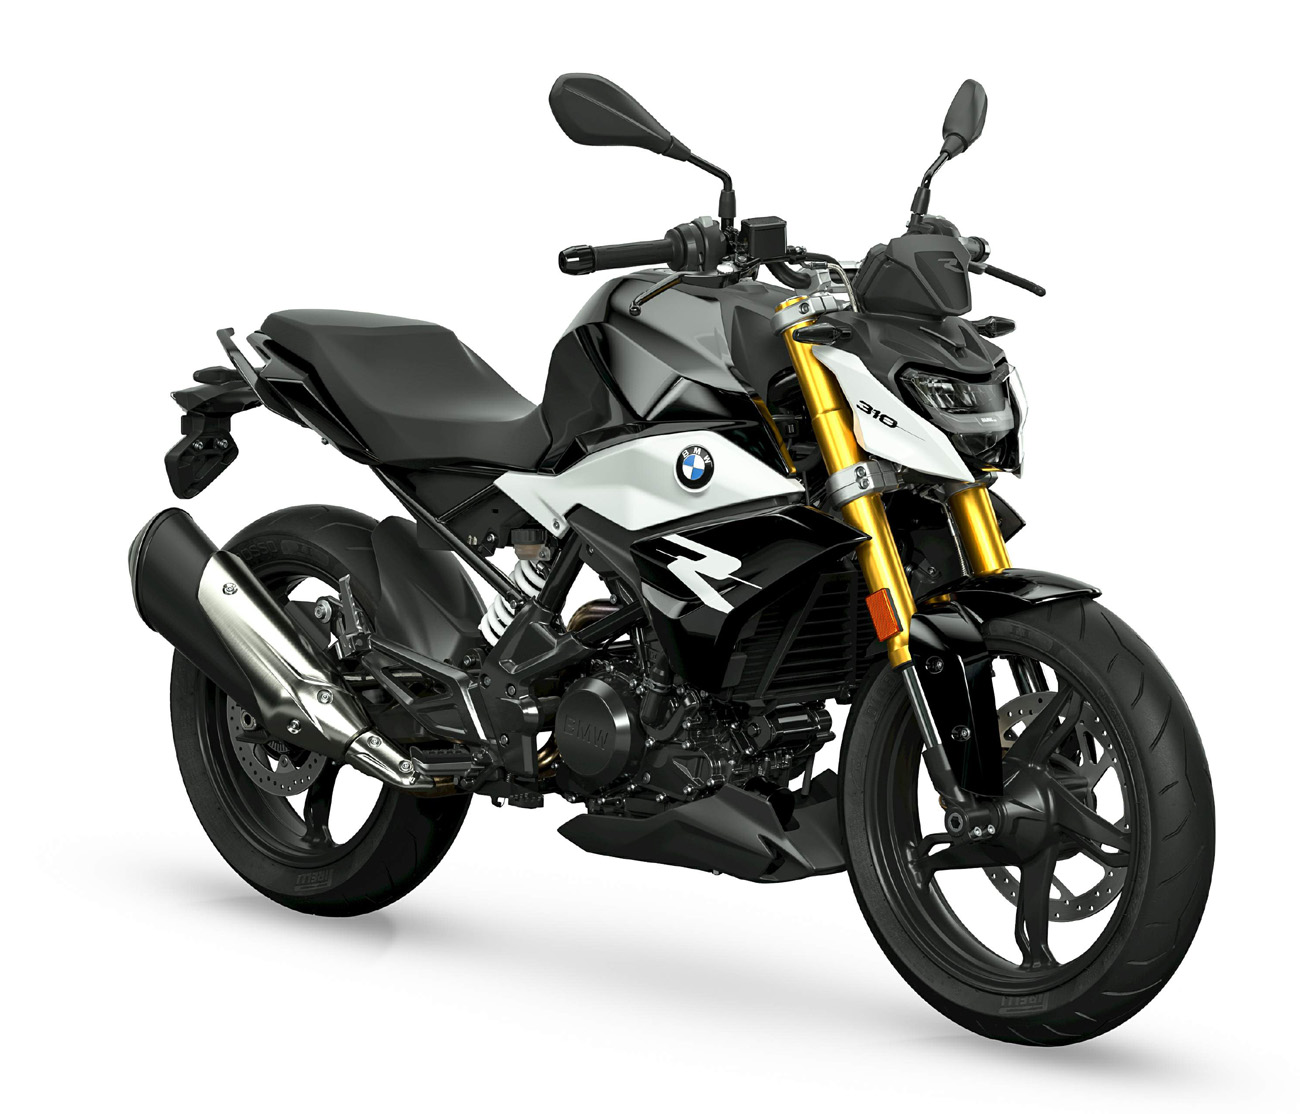 BMW G 310R technical specifications